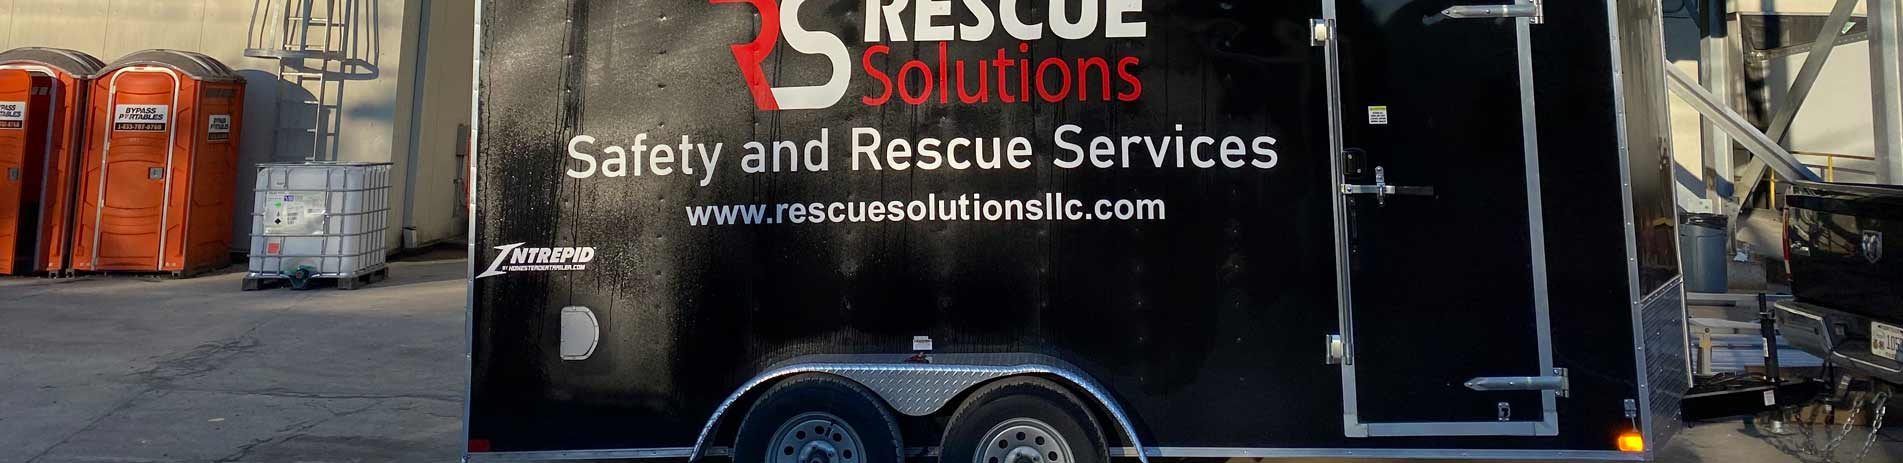 rescue-solution-truck-img